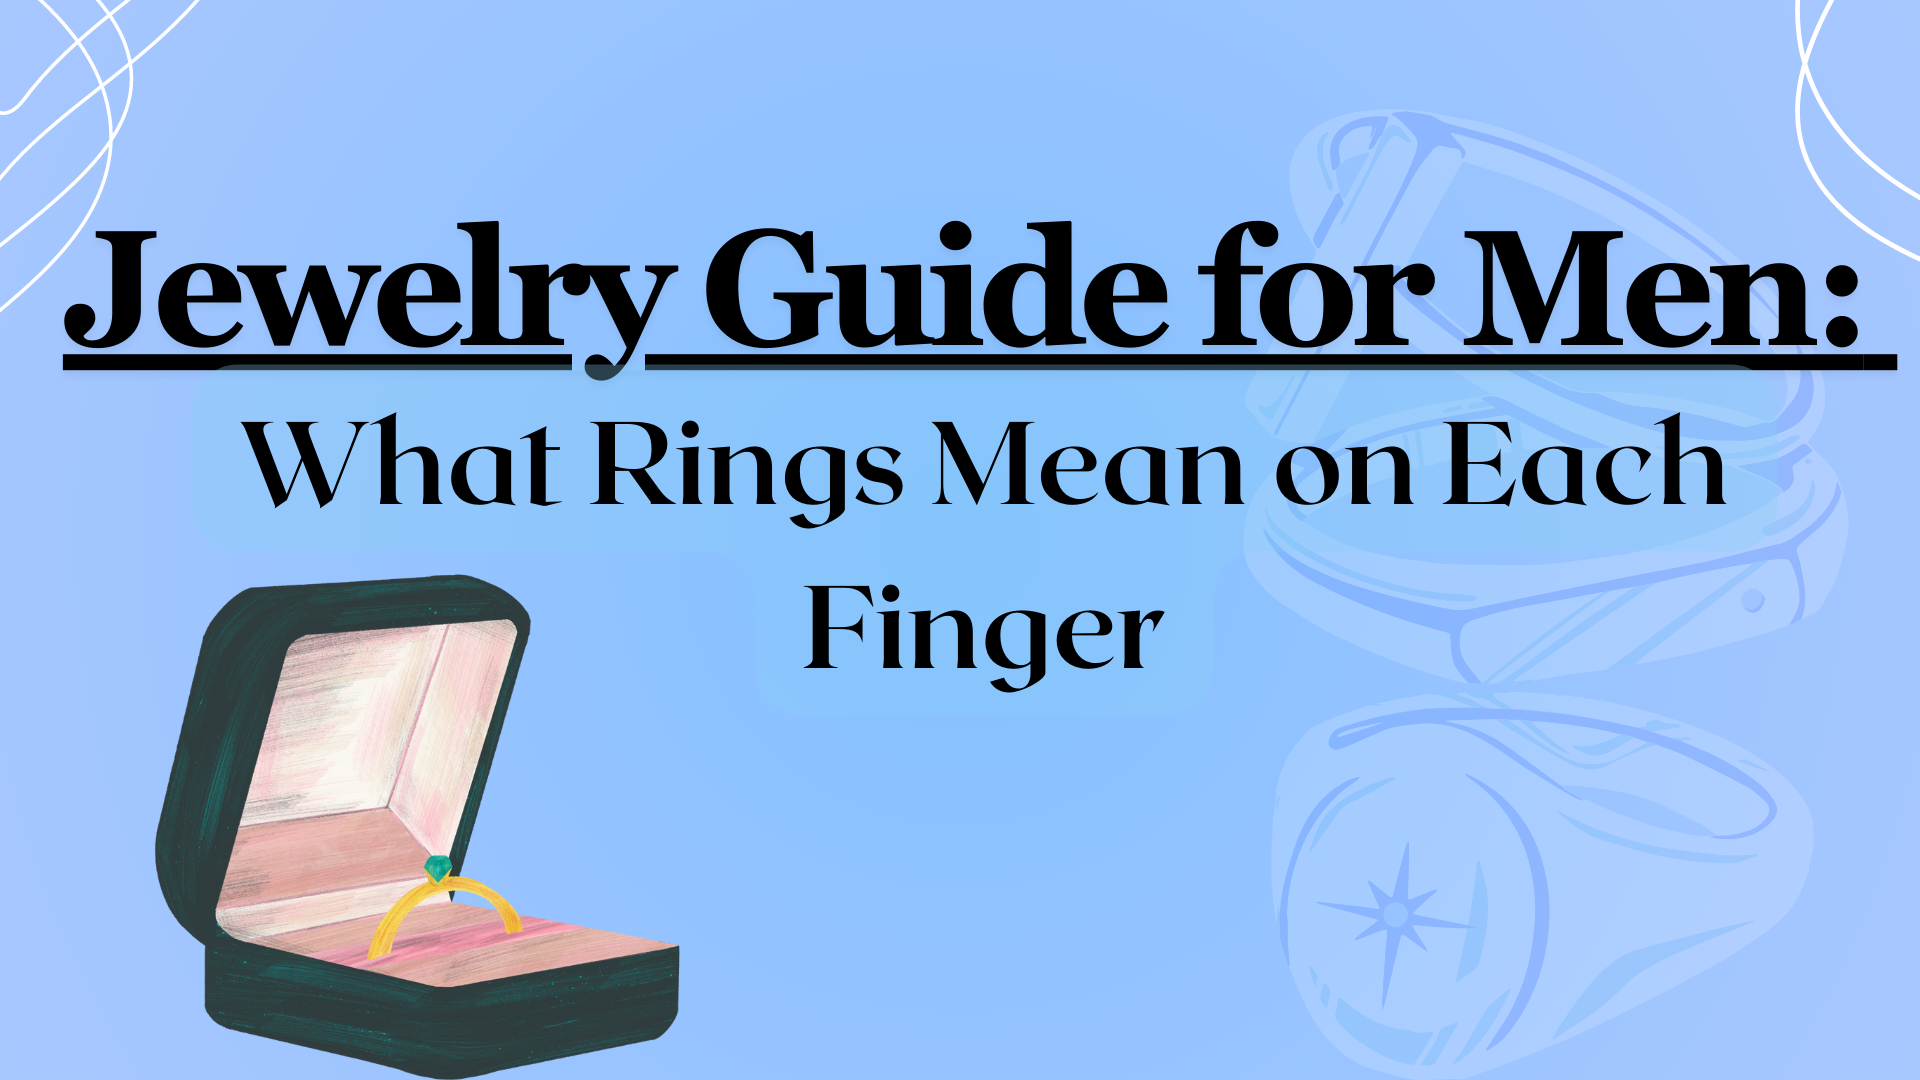 Jewelry Guide for Men - Meaning Of Rings On Each Finger